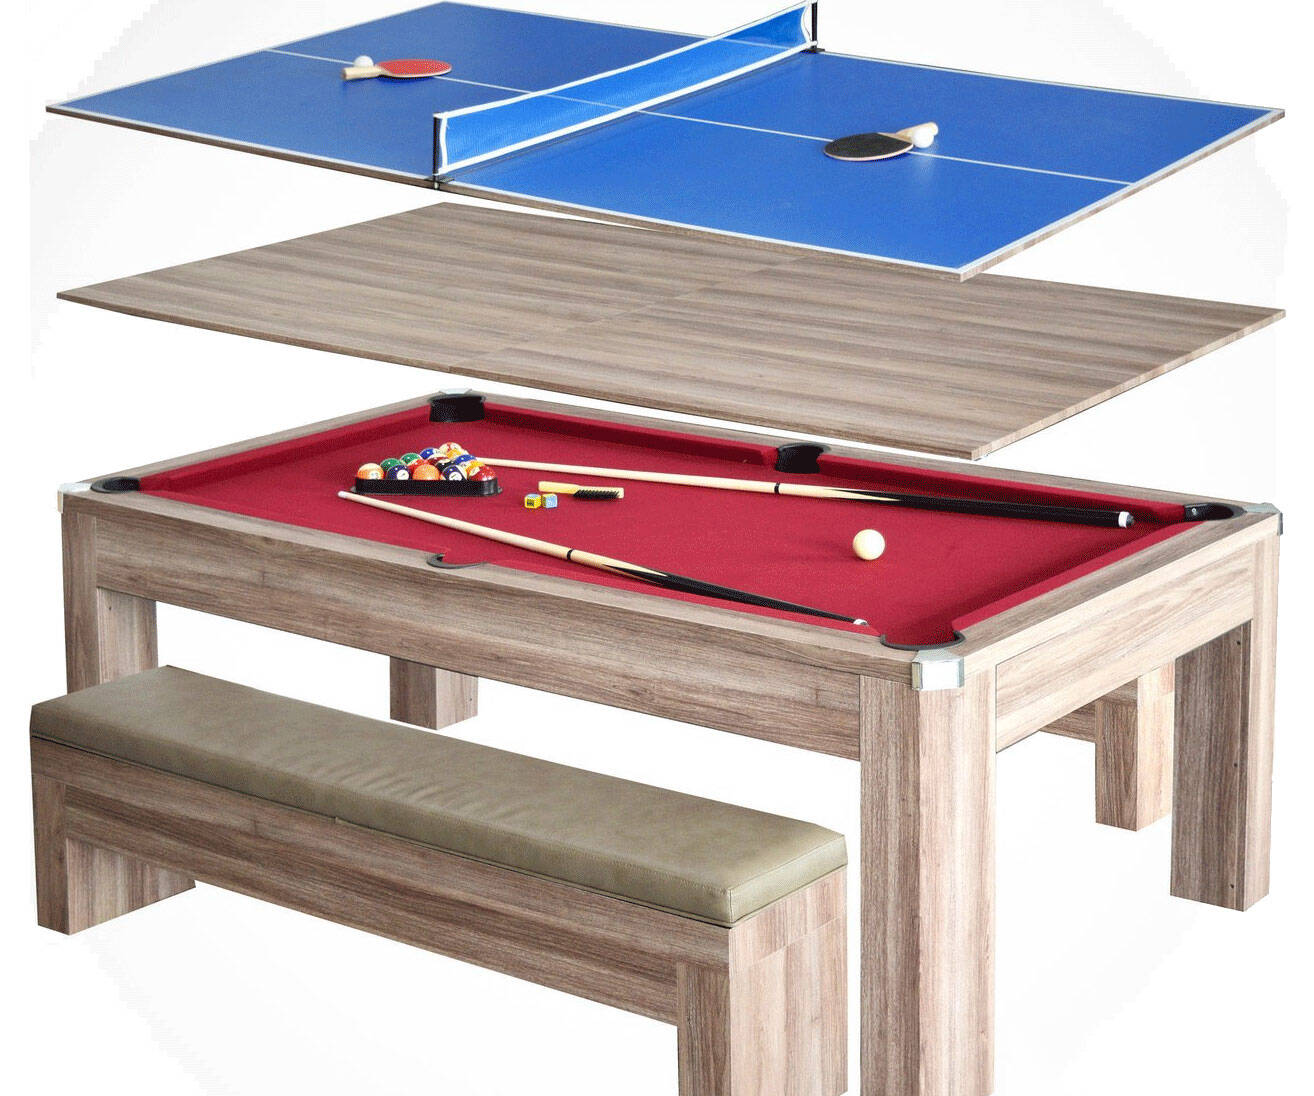 3-In-1 Picnic Pool & Ping Pong Table - //coolthings.us